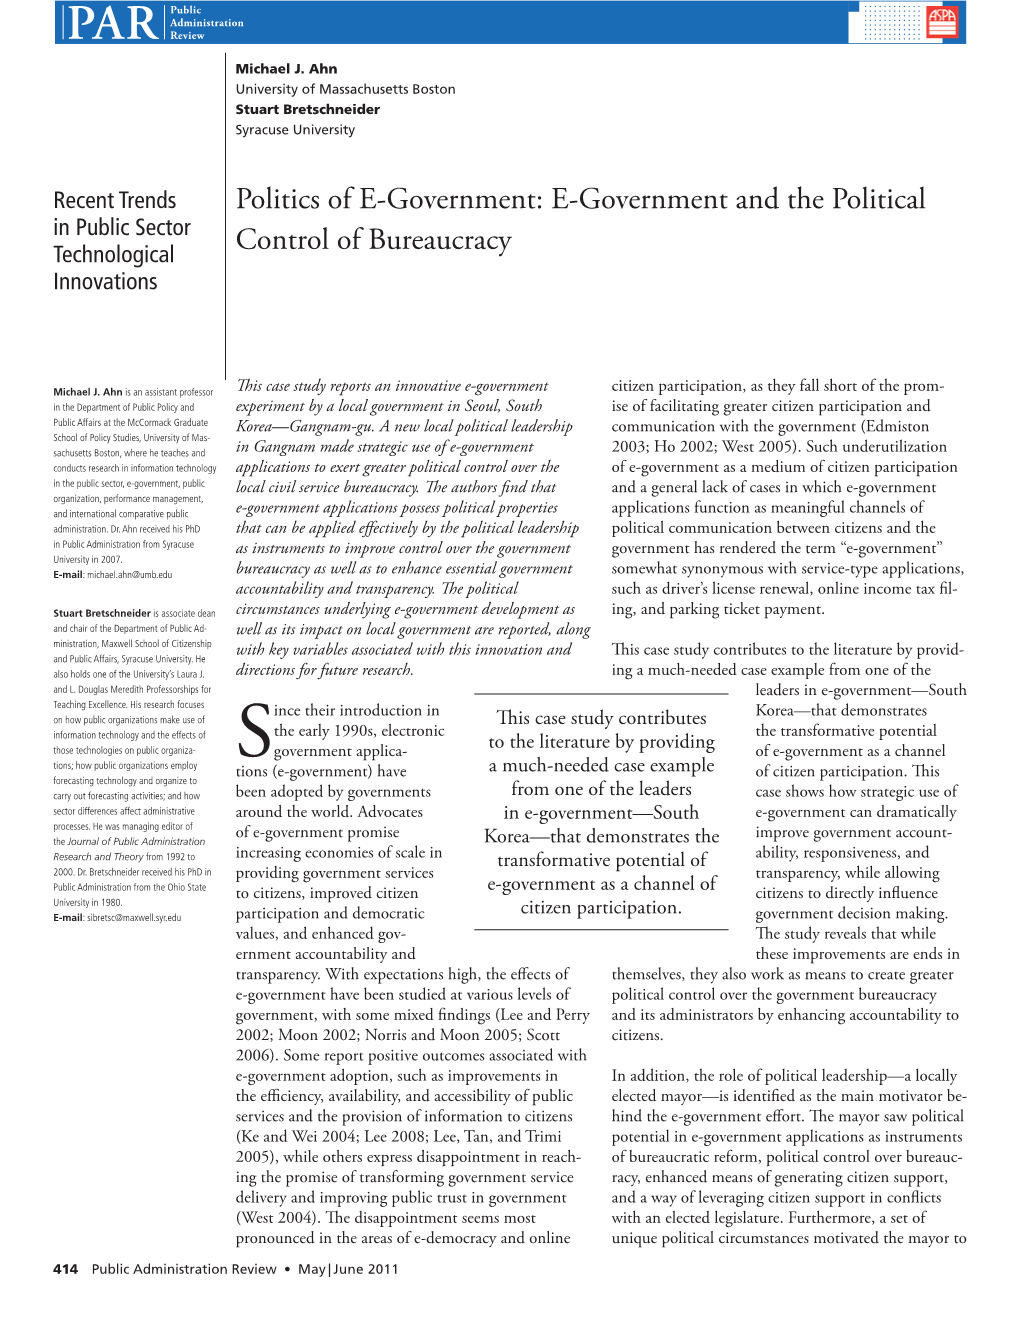 Politics of Egovernment: Egovernment and the Political